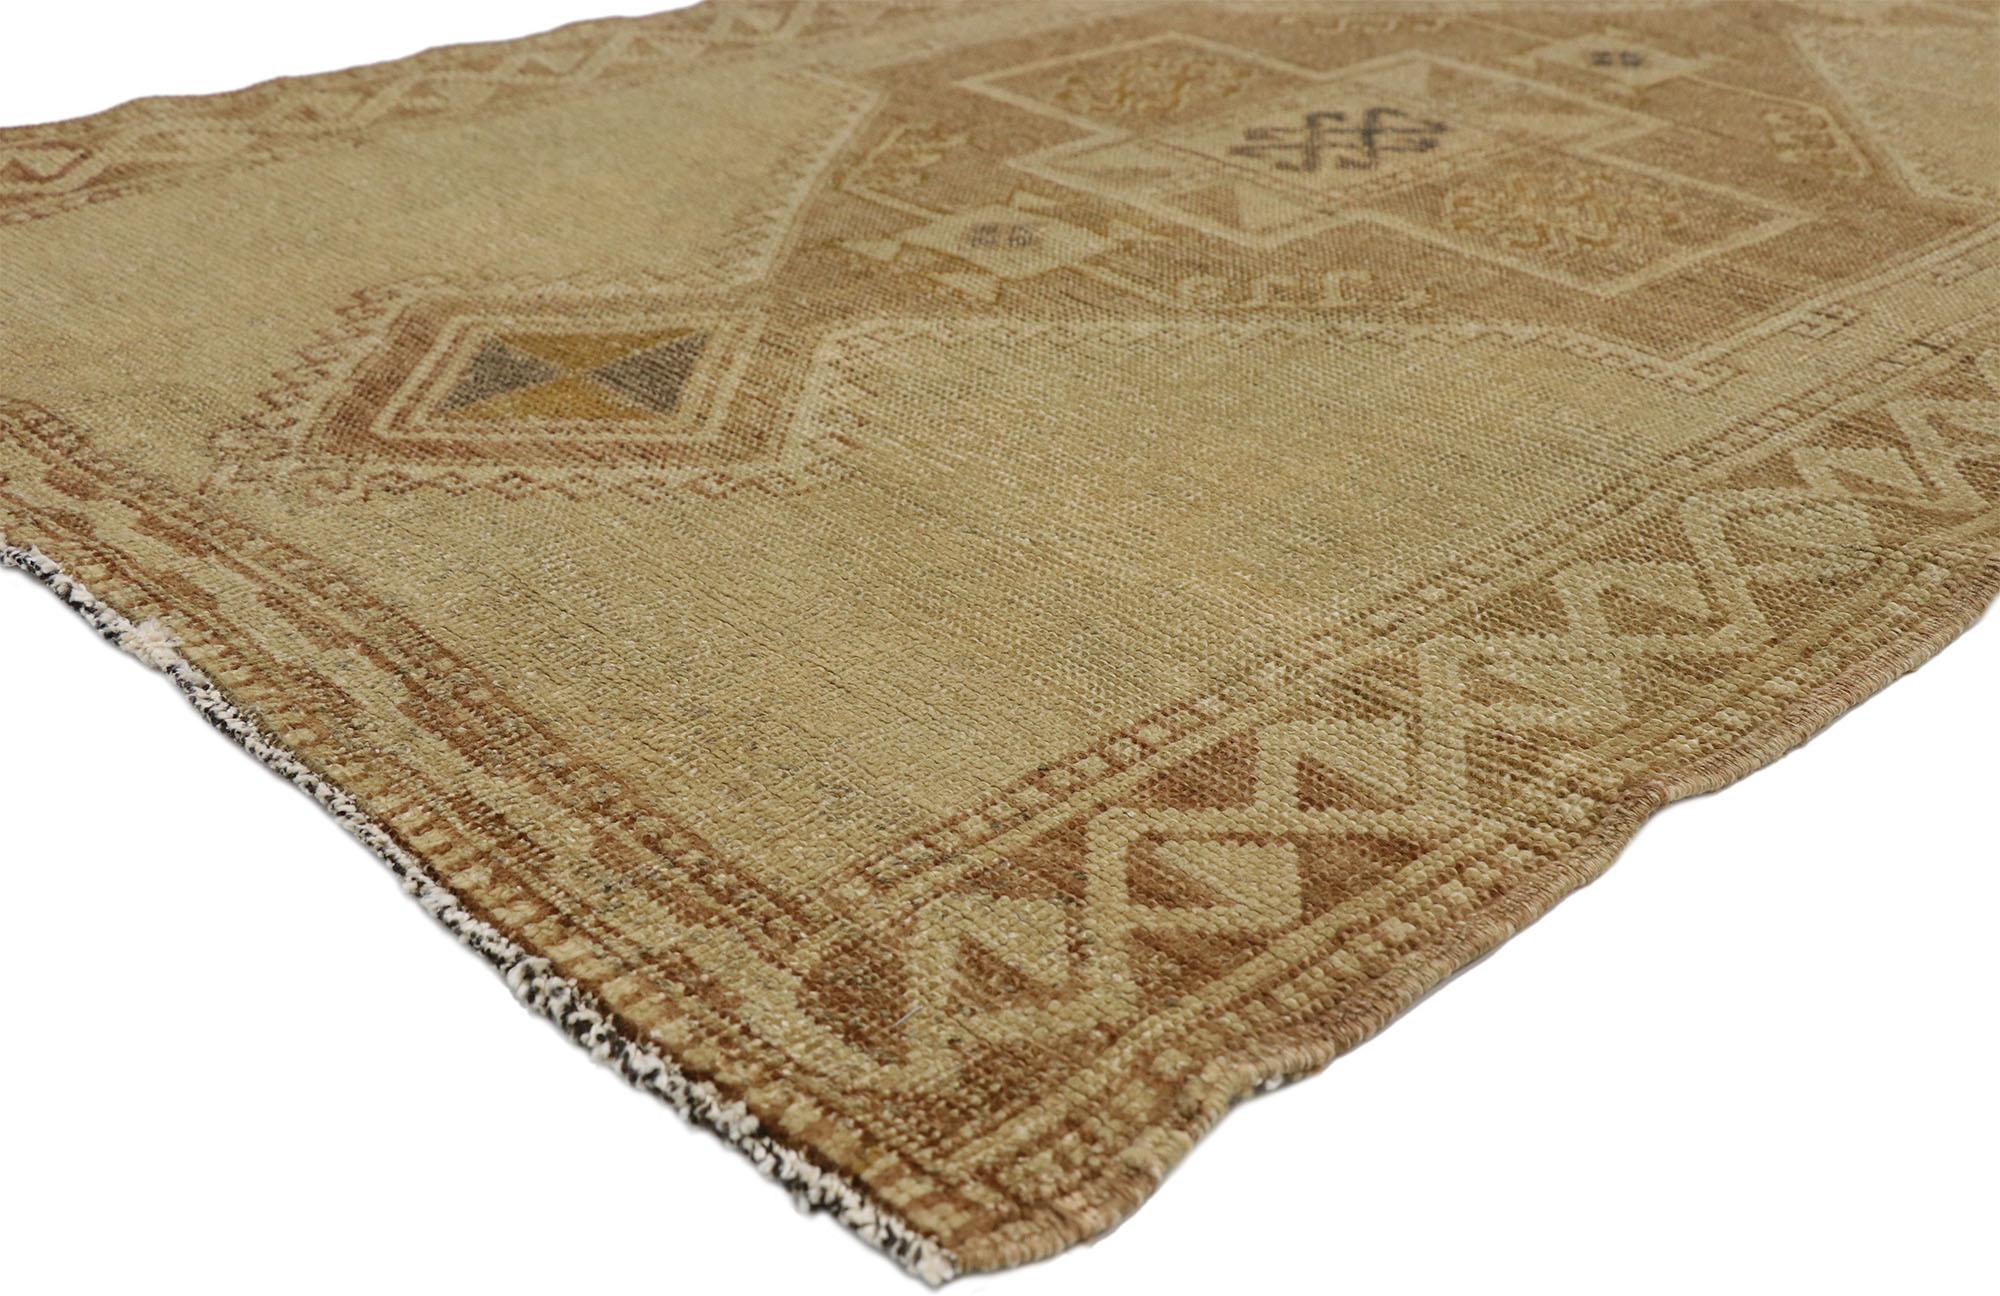 Vintage Turkish Oushak Carpet Runner with Modern Style and Muted Colors In Good Condition For Sale In Dallas, TX